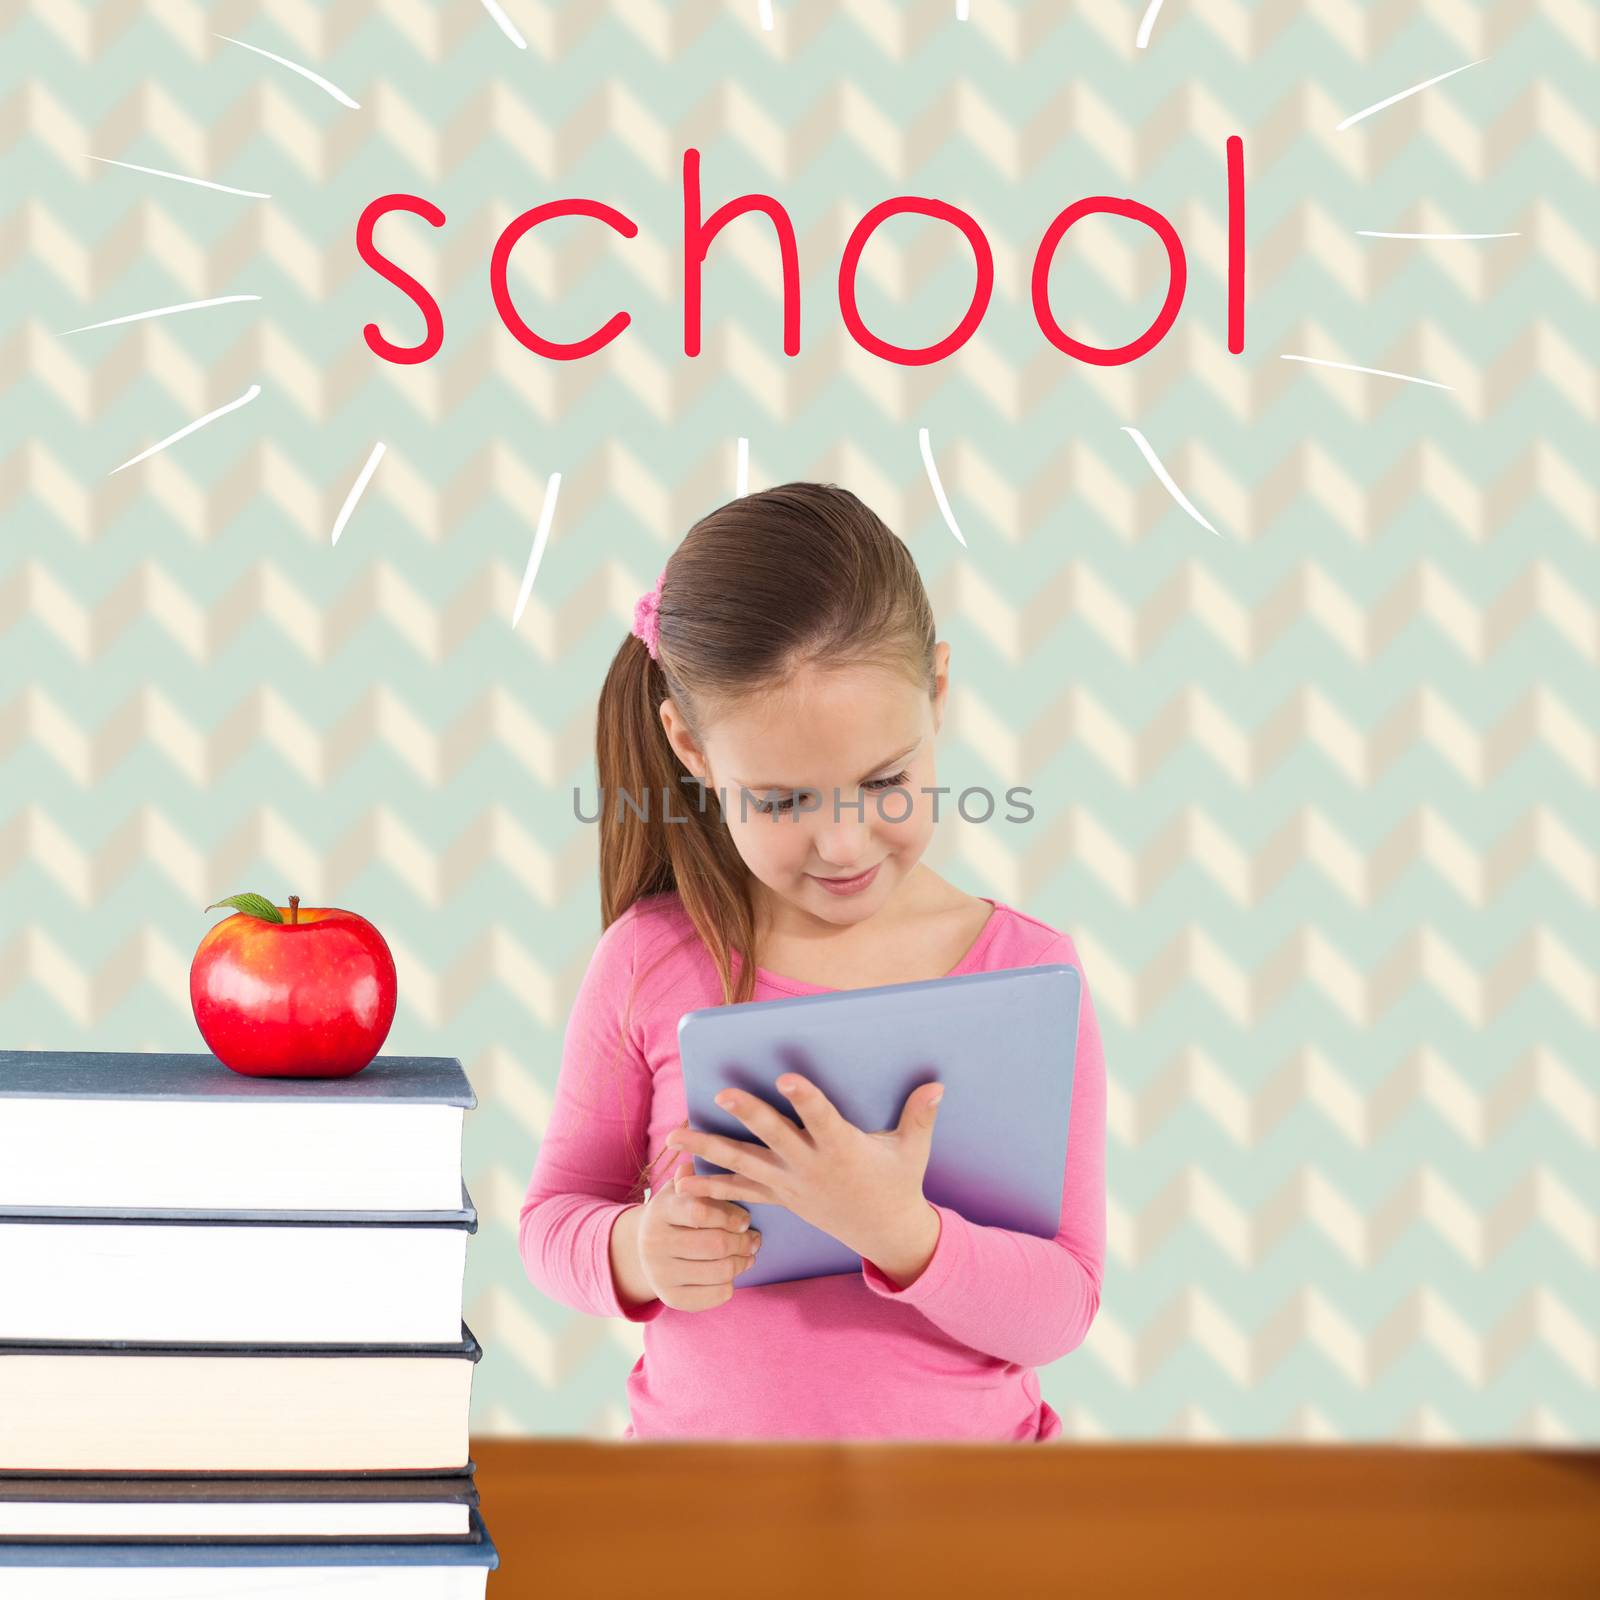 The word school and cute girl using tablet against red apple on pile of books